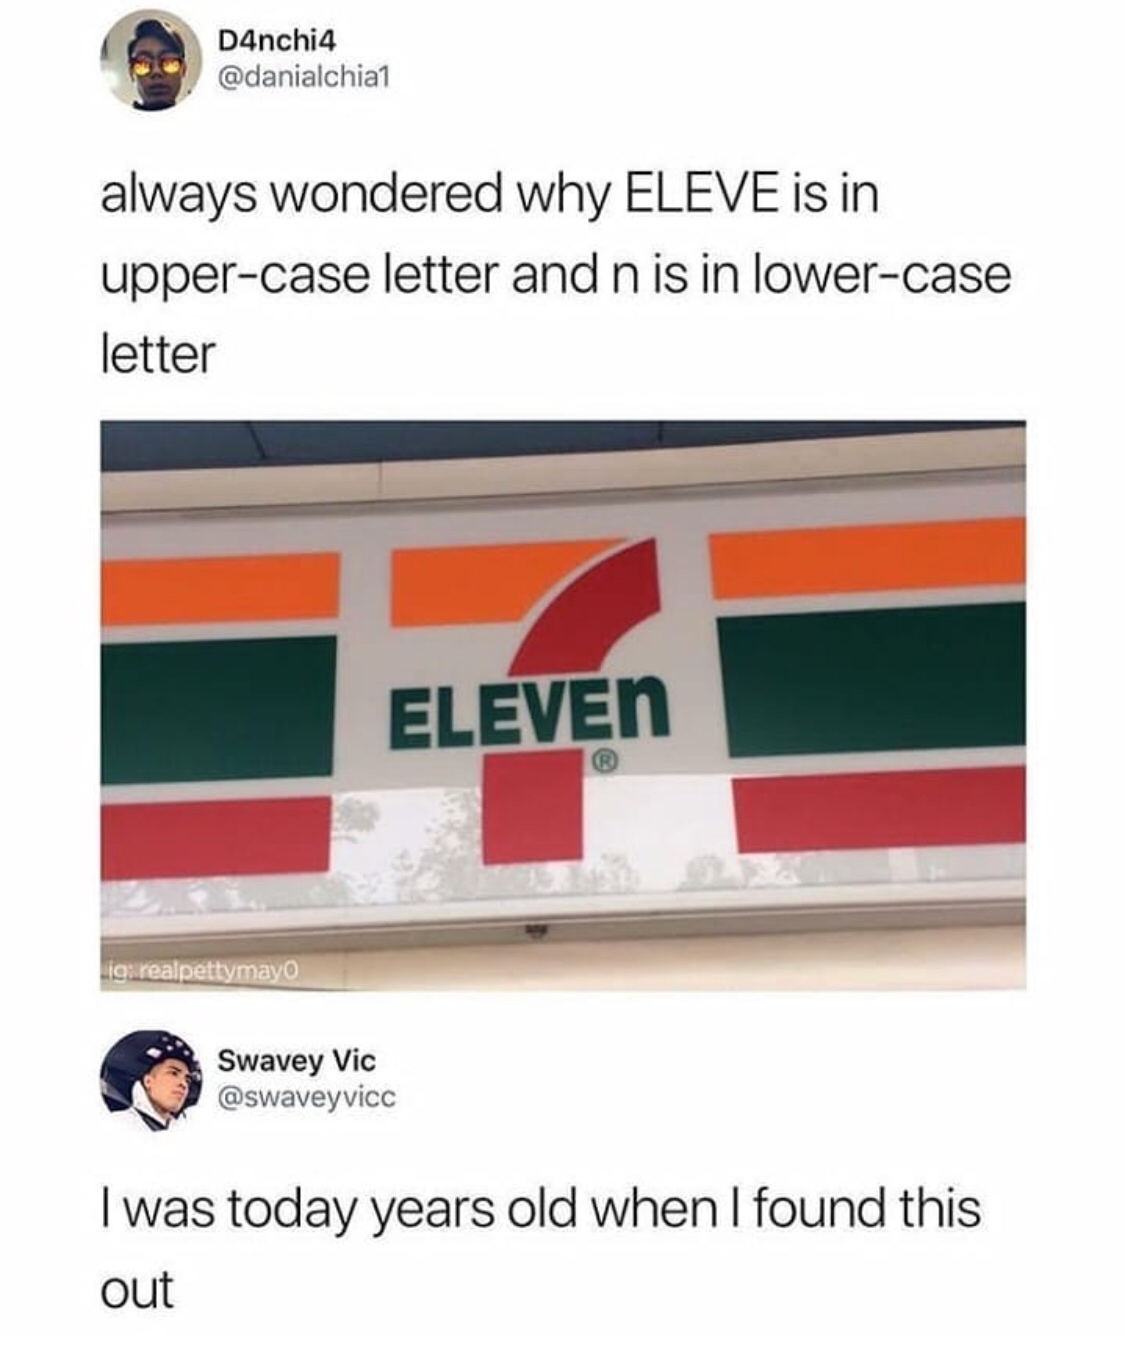 7 eleven - D4nchi4 always wondered why Eleve is in uppercase letter and n is in lowercase letter Eleven je realpettymayo Swavey Vic I was today years old when I found this out